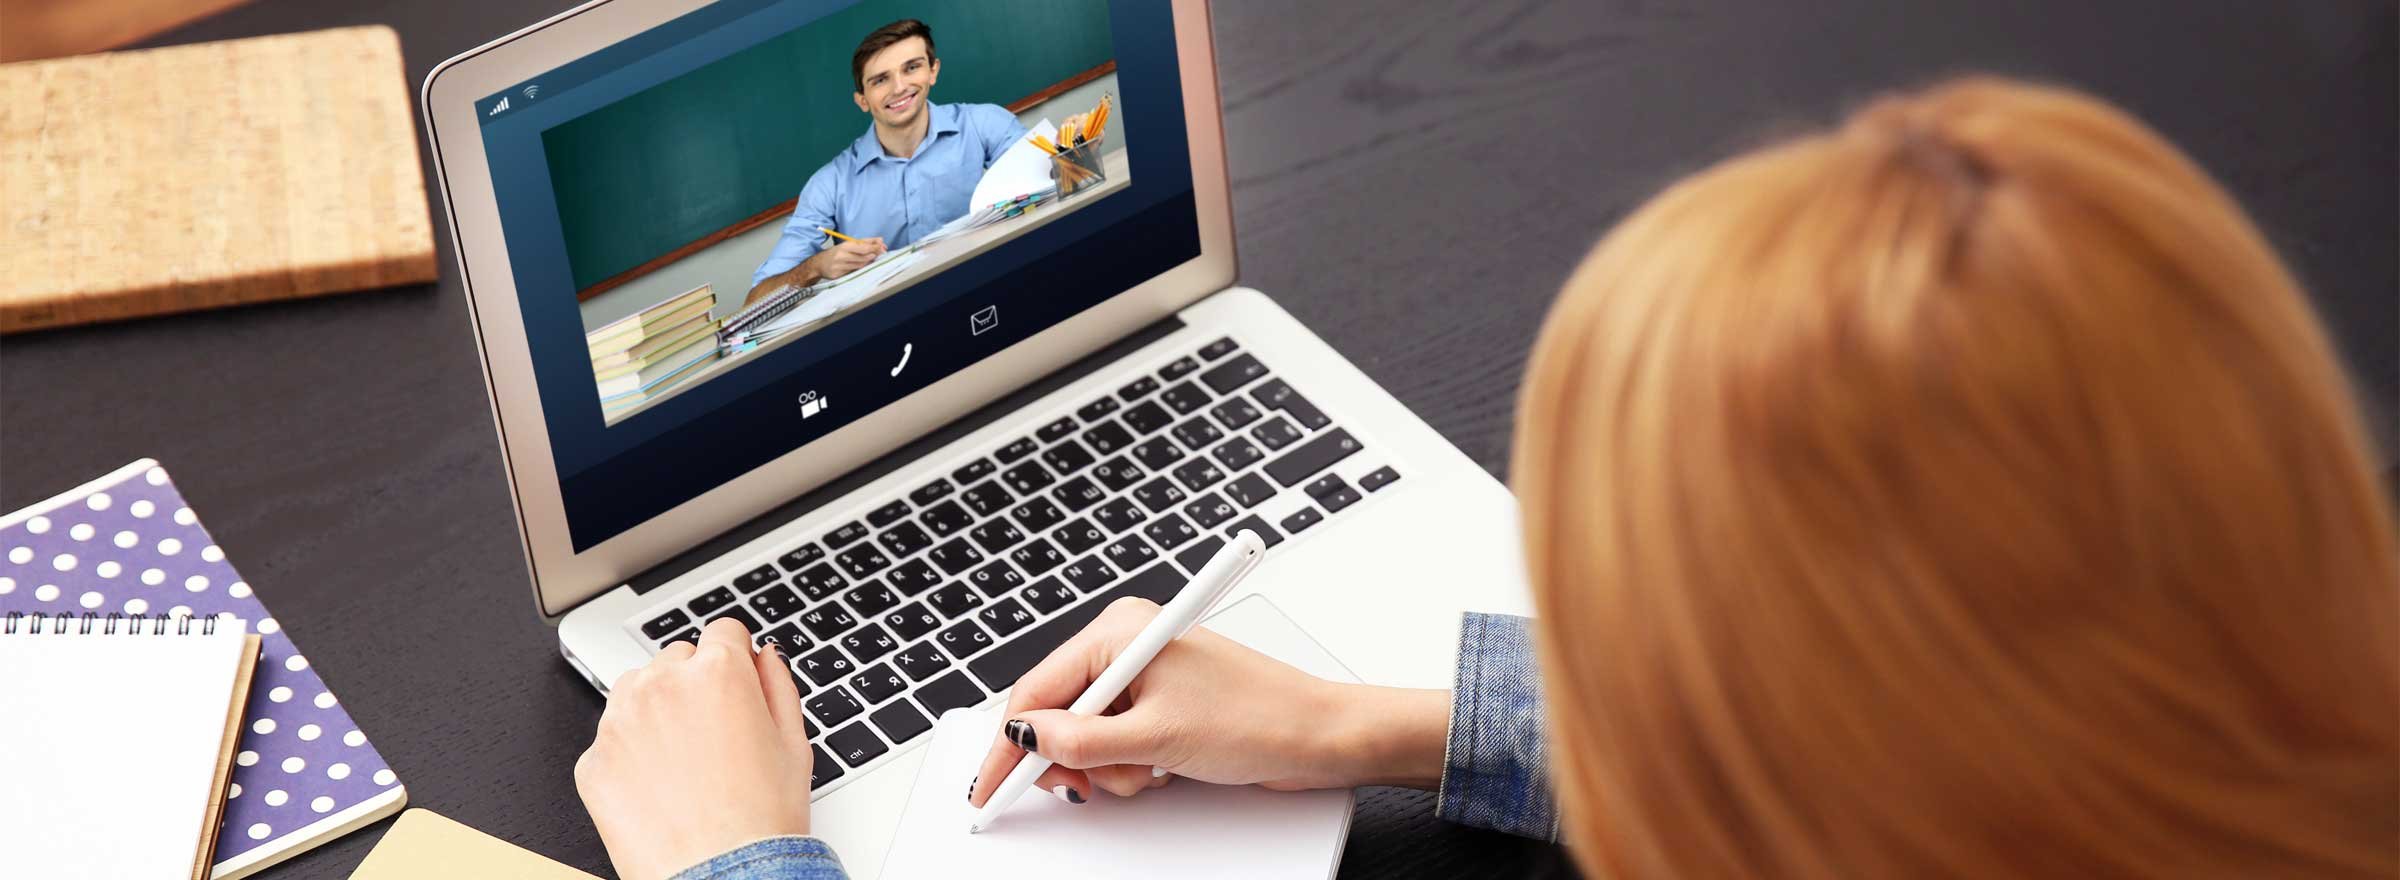 woman in a video conference with a man